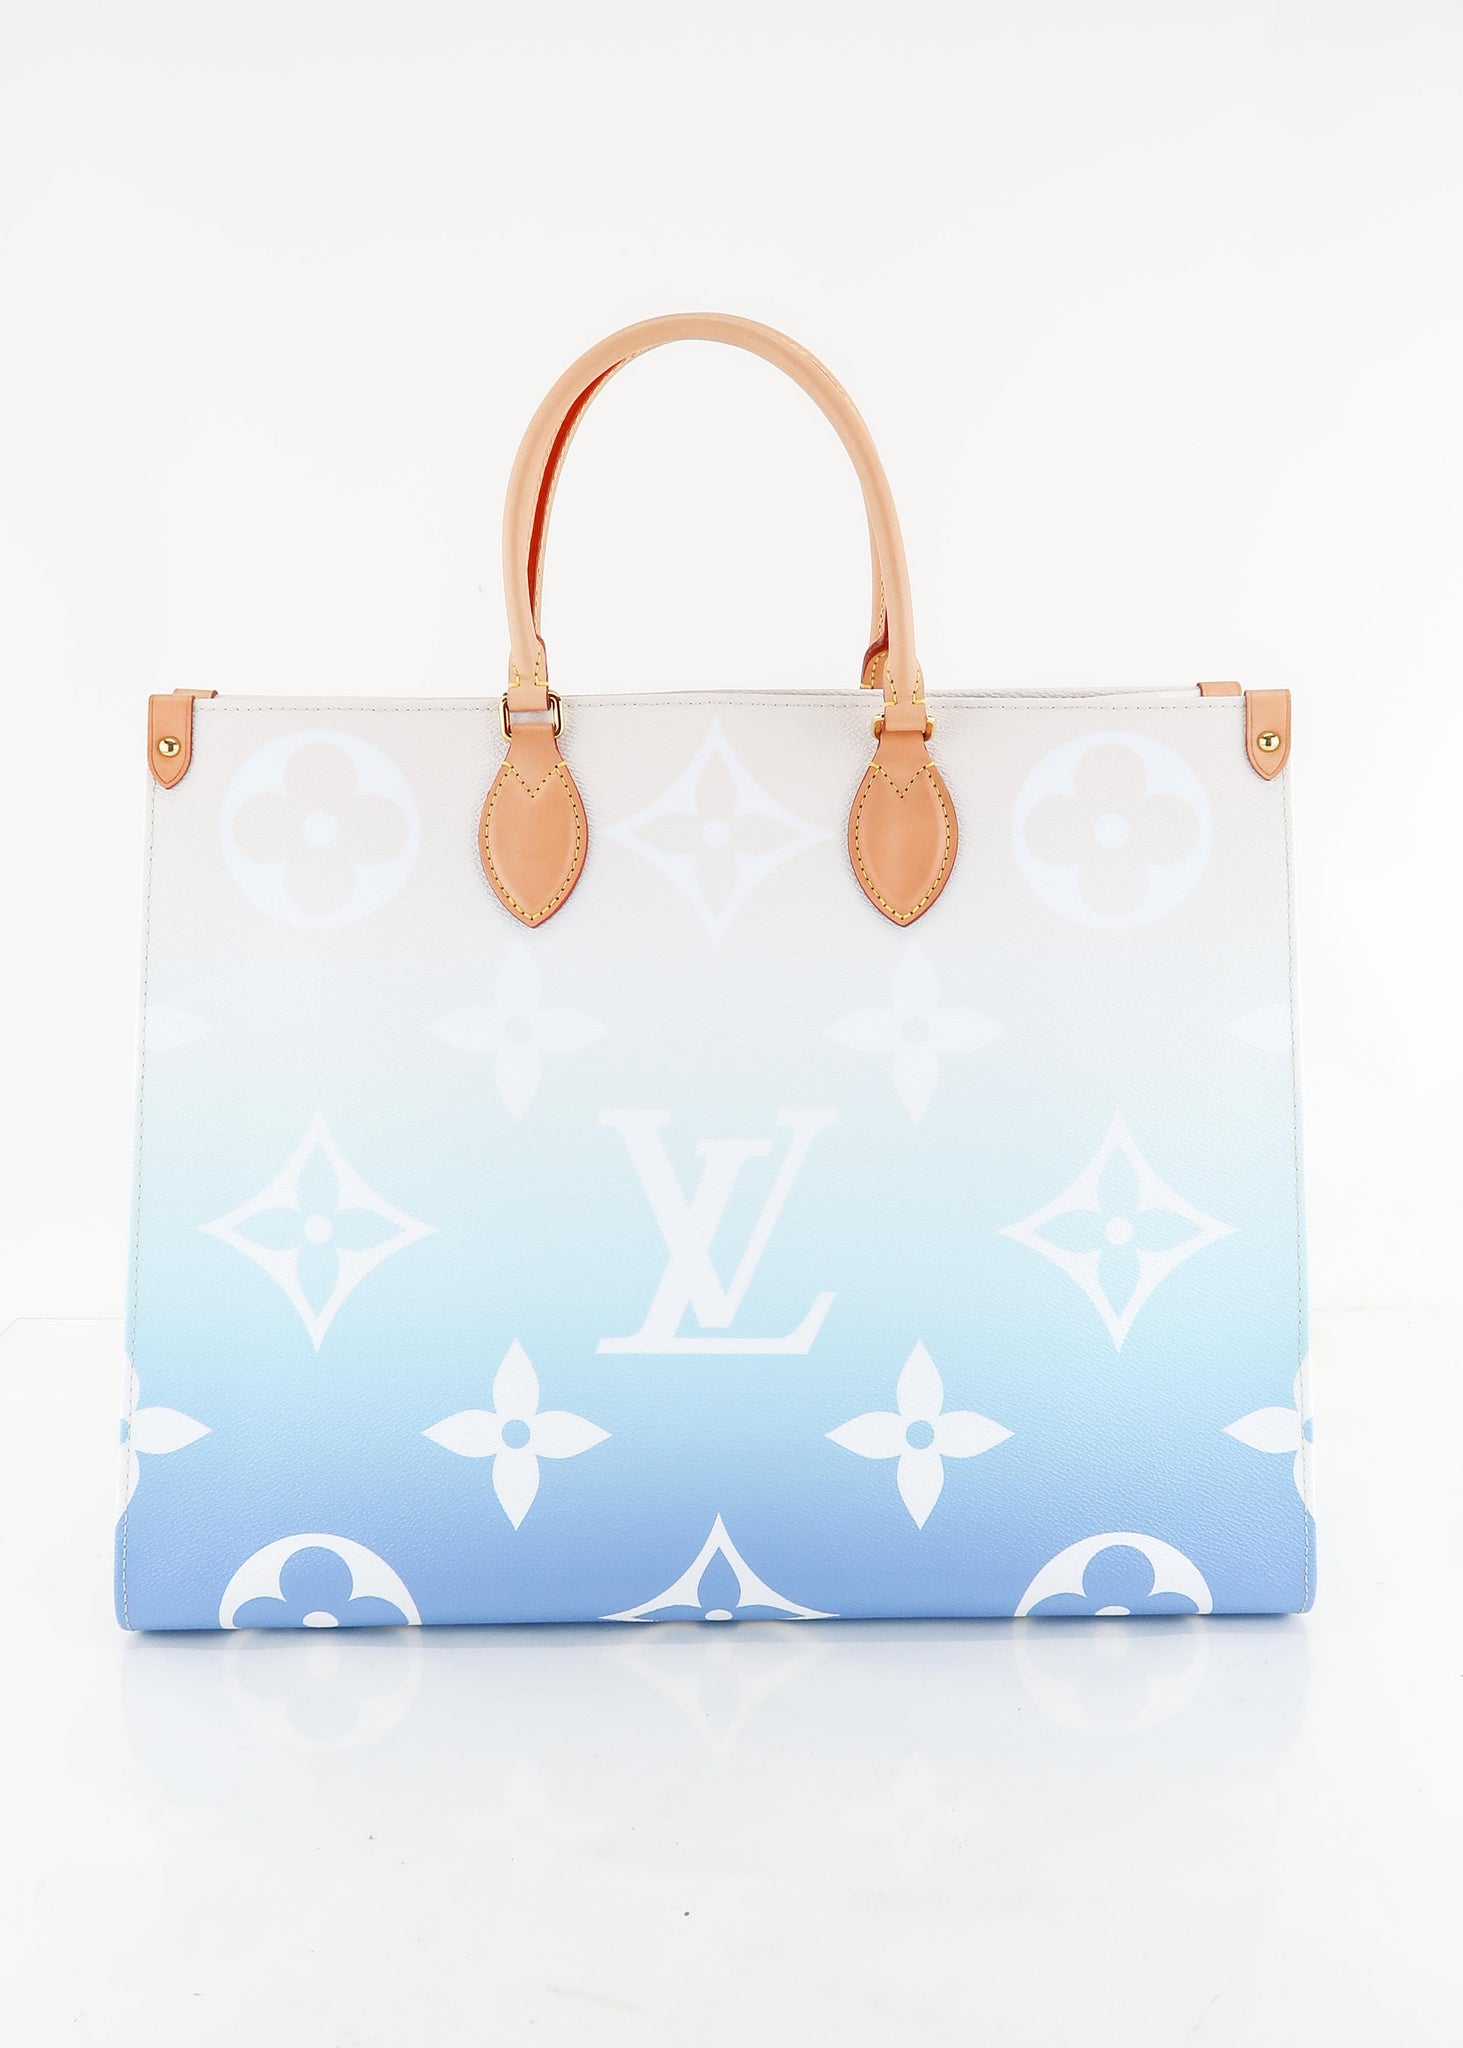 Louis Vuitton Blue Giant Monogram OnTheRun By The Pool GM Two Way Tote Bag